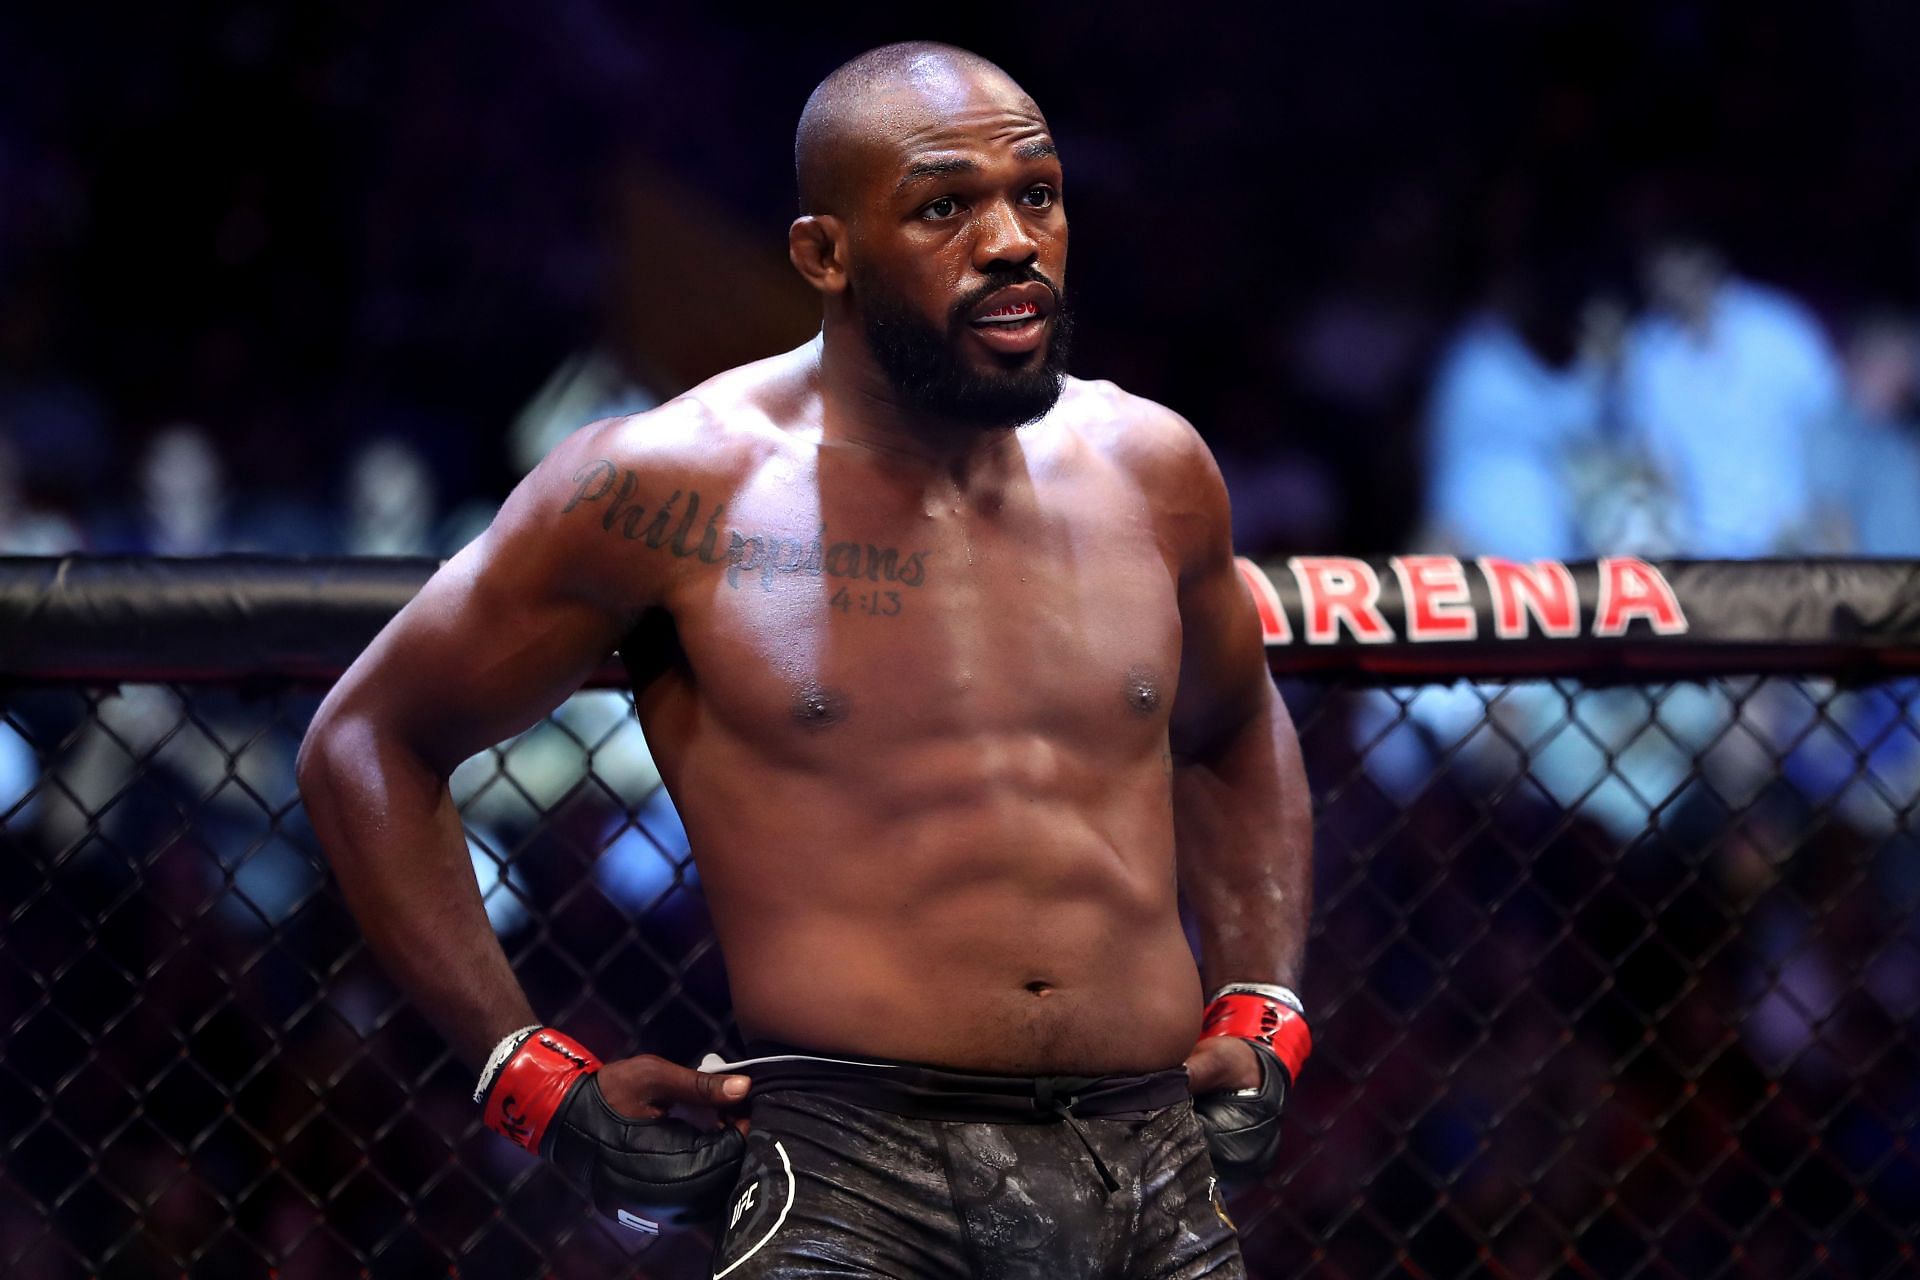 2009 saw Jon Jones really mark himself out as a title contender